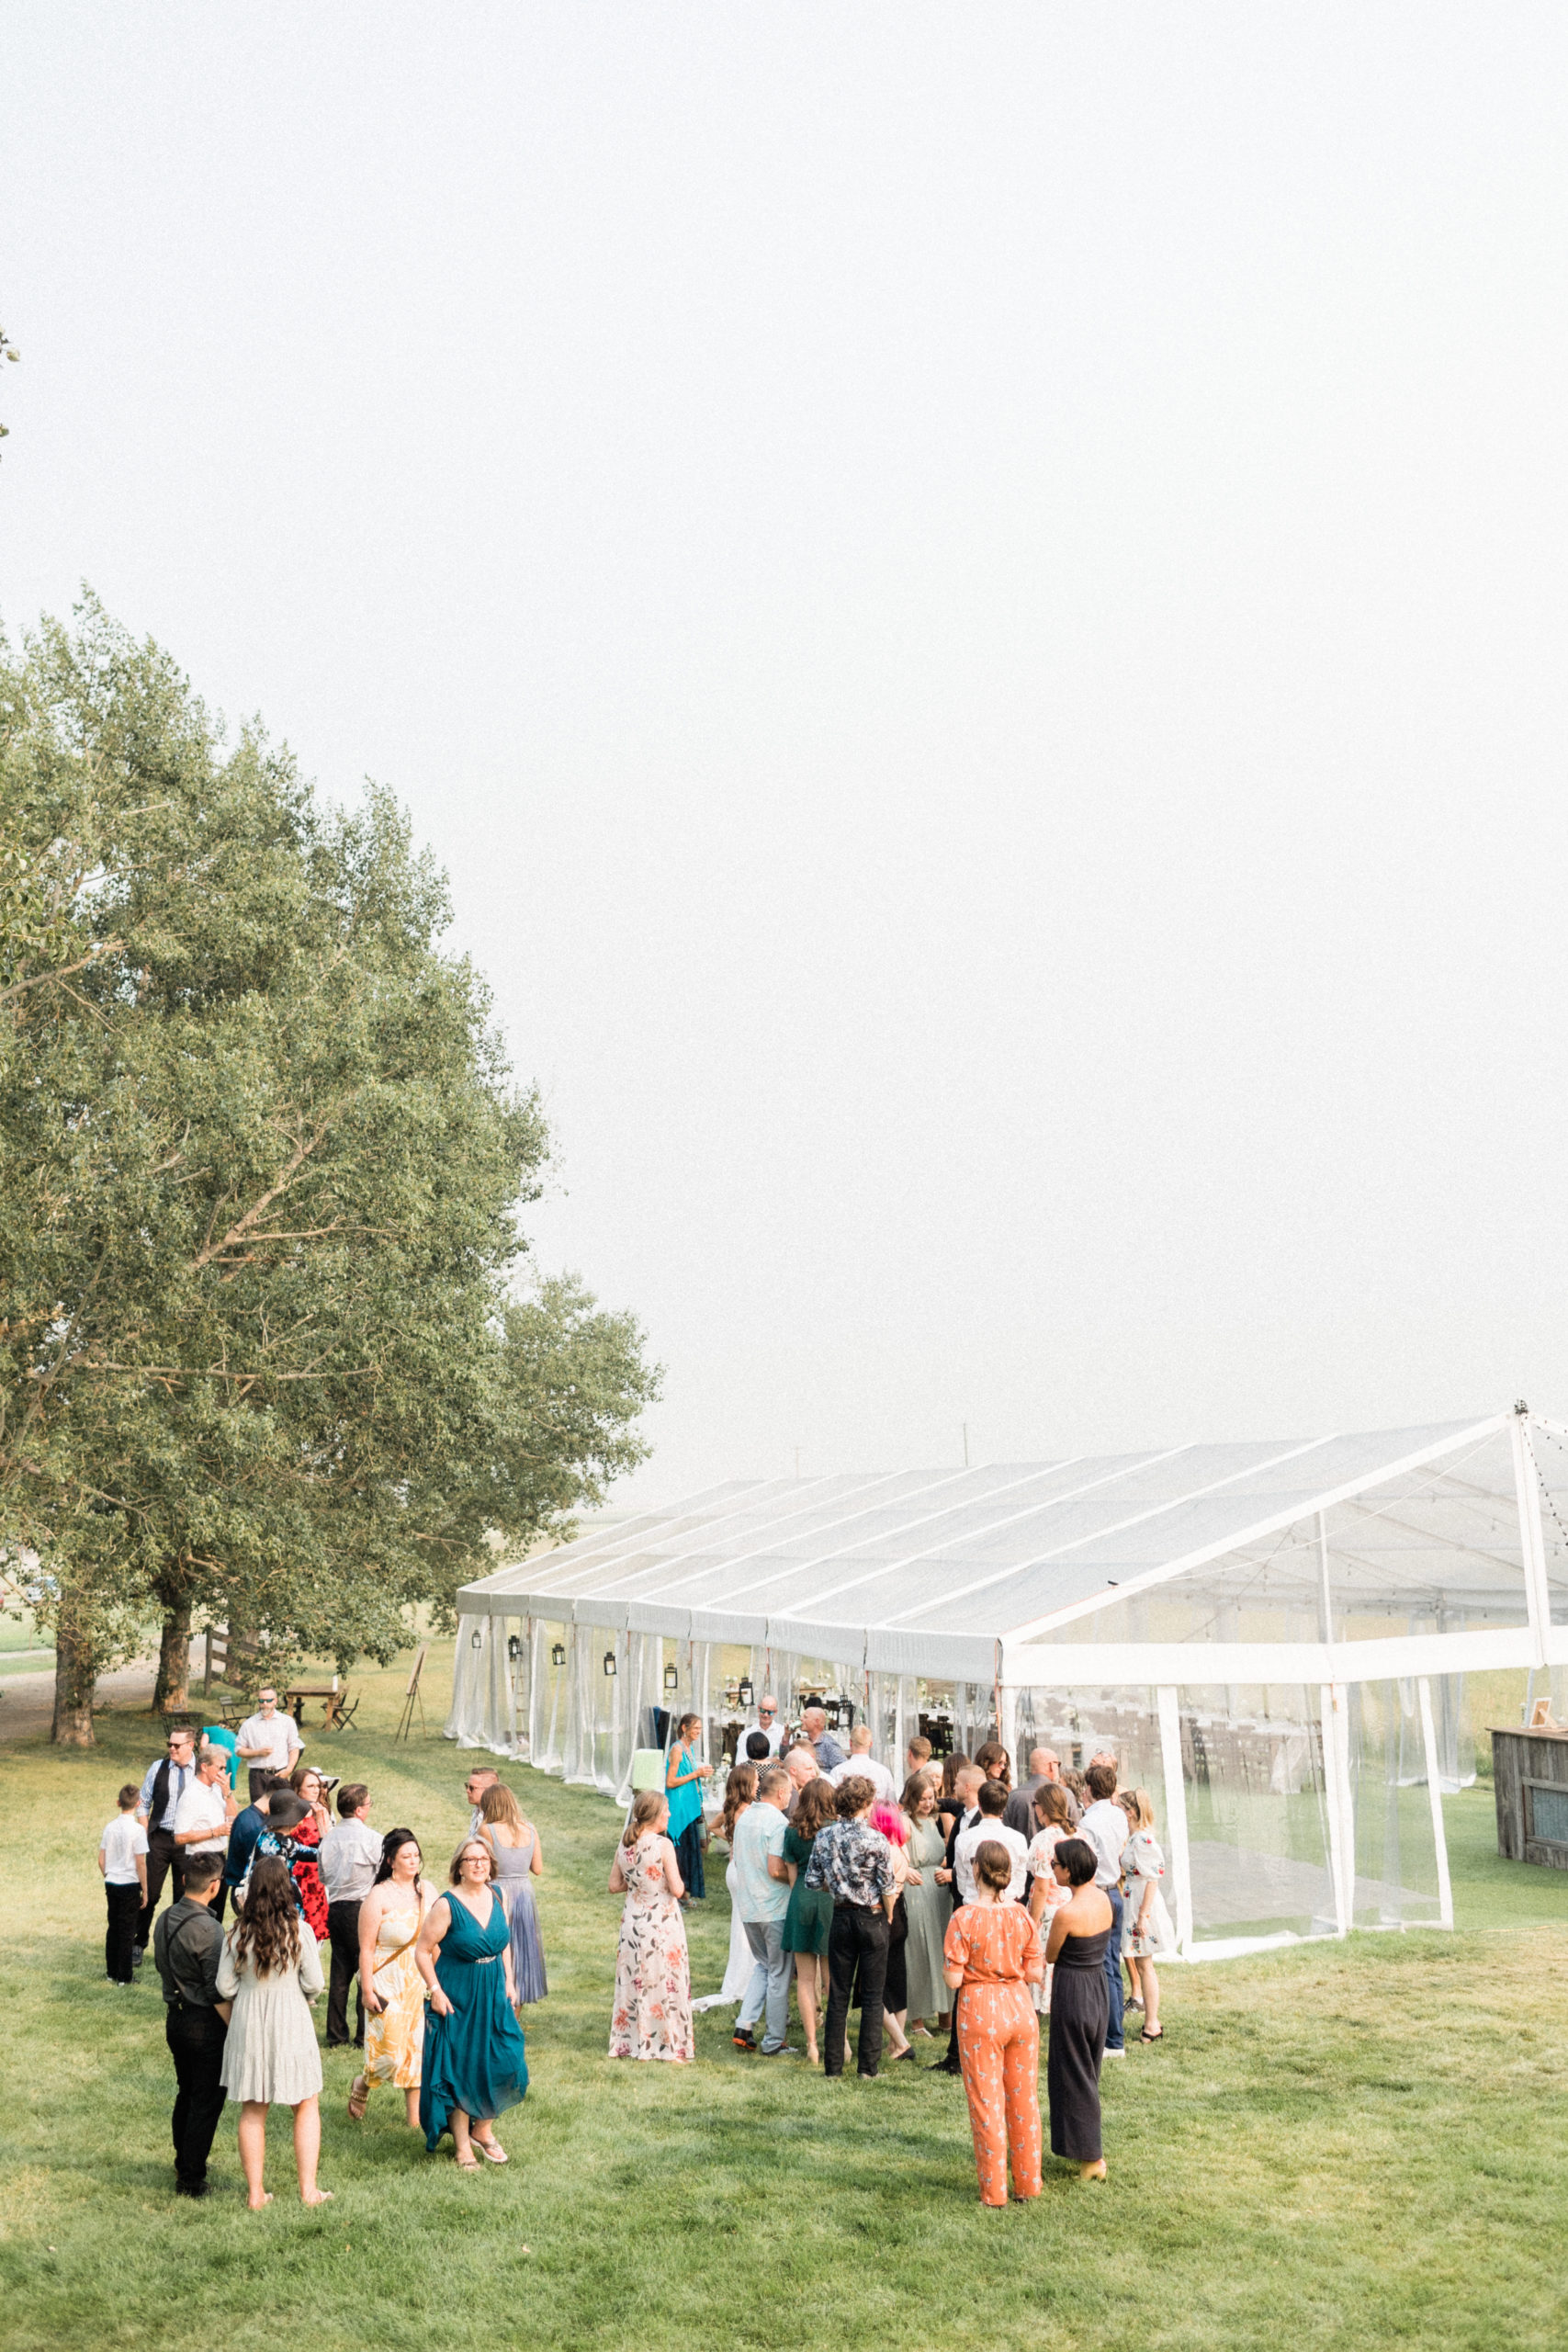 An outdoor wedding in the Canadian Prairies - A reception to remember